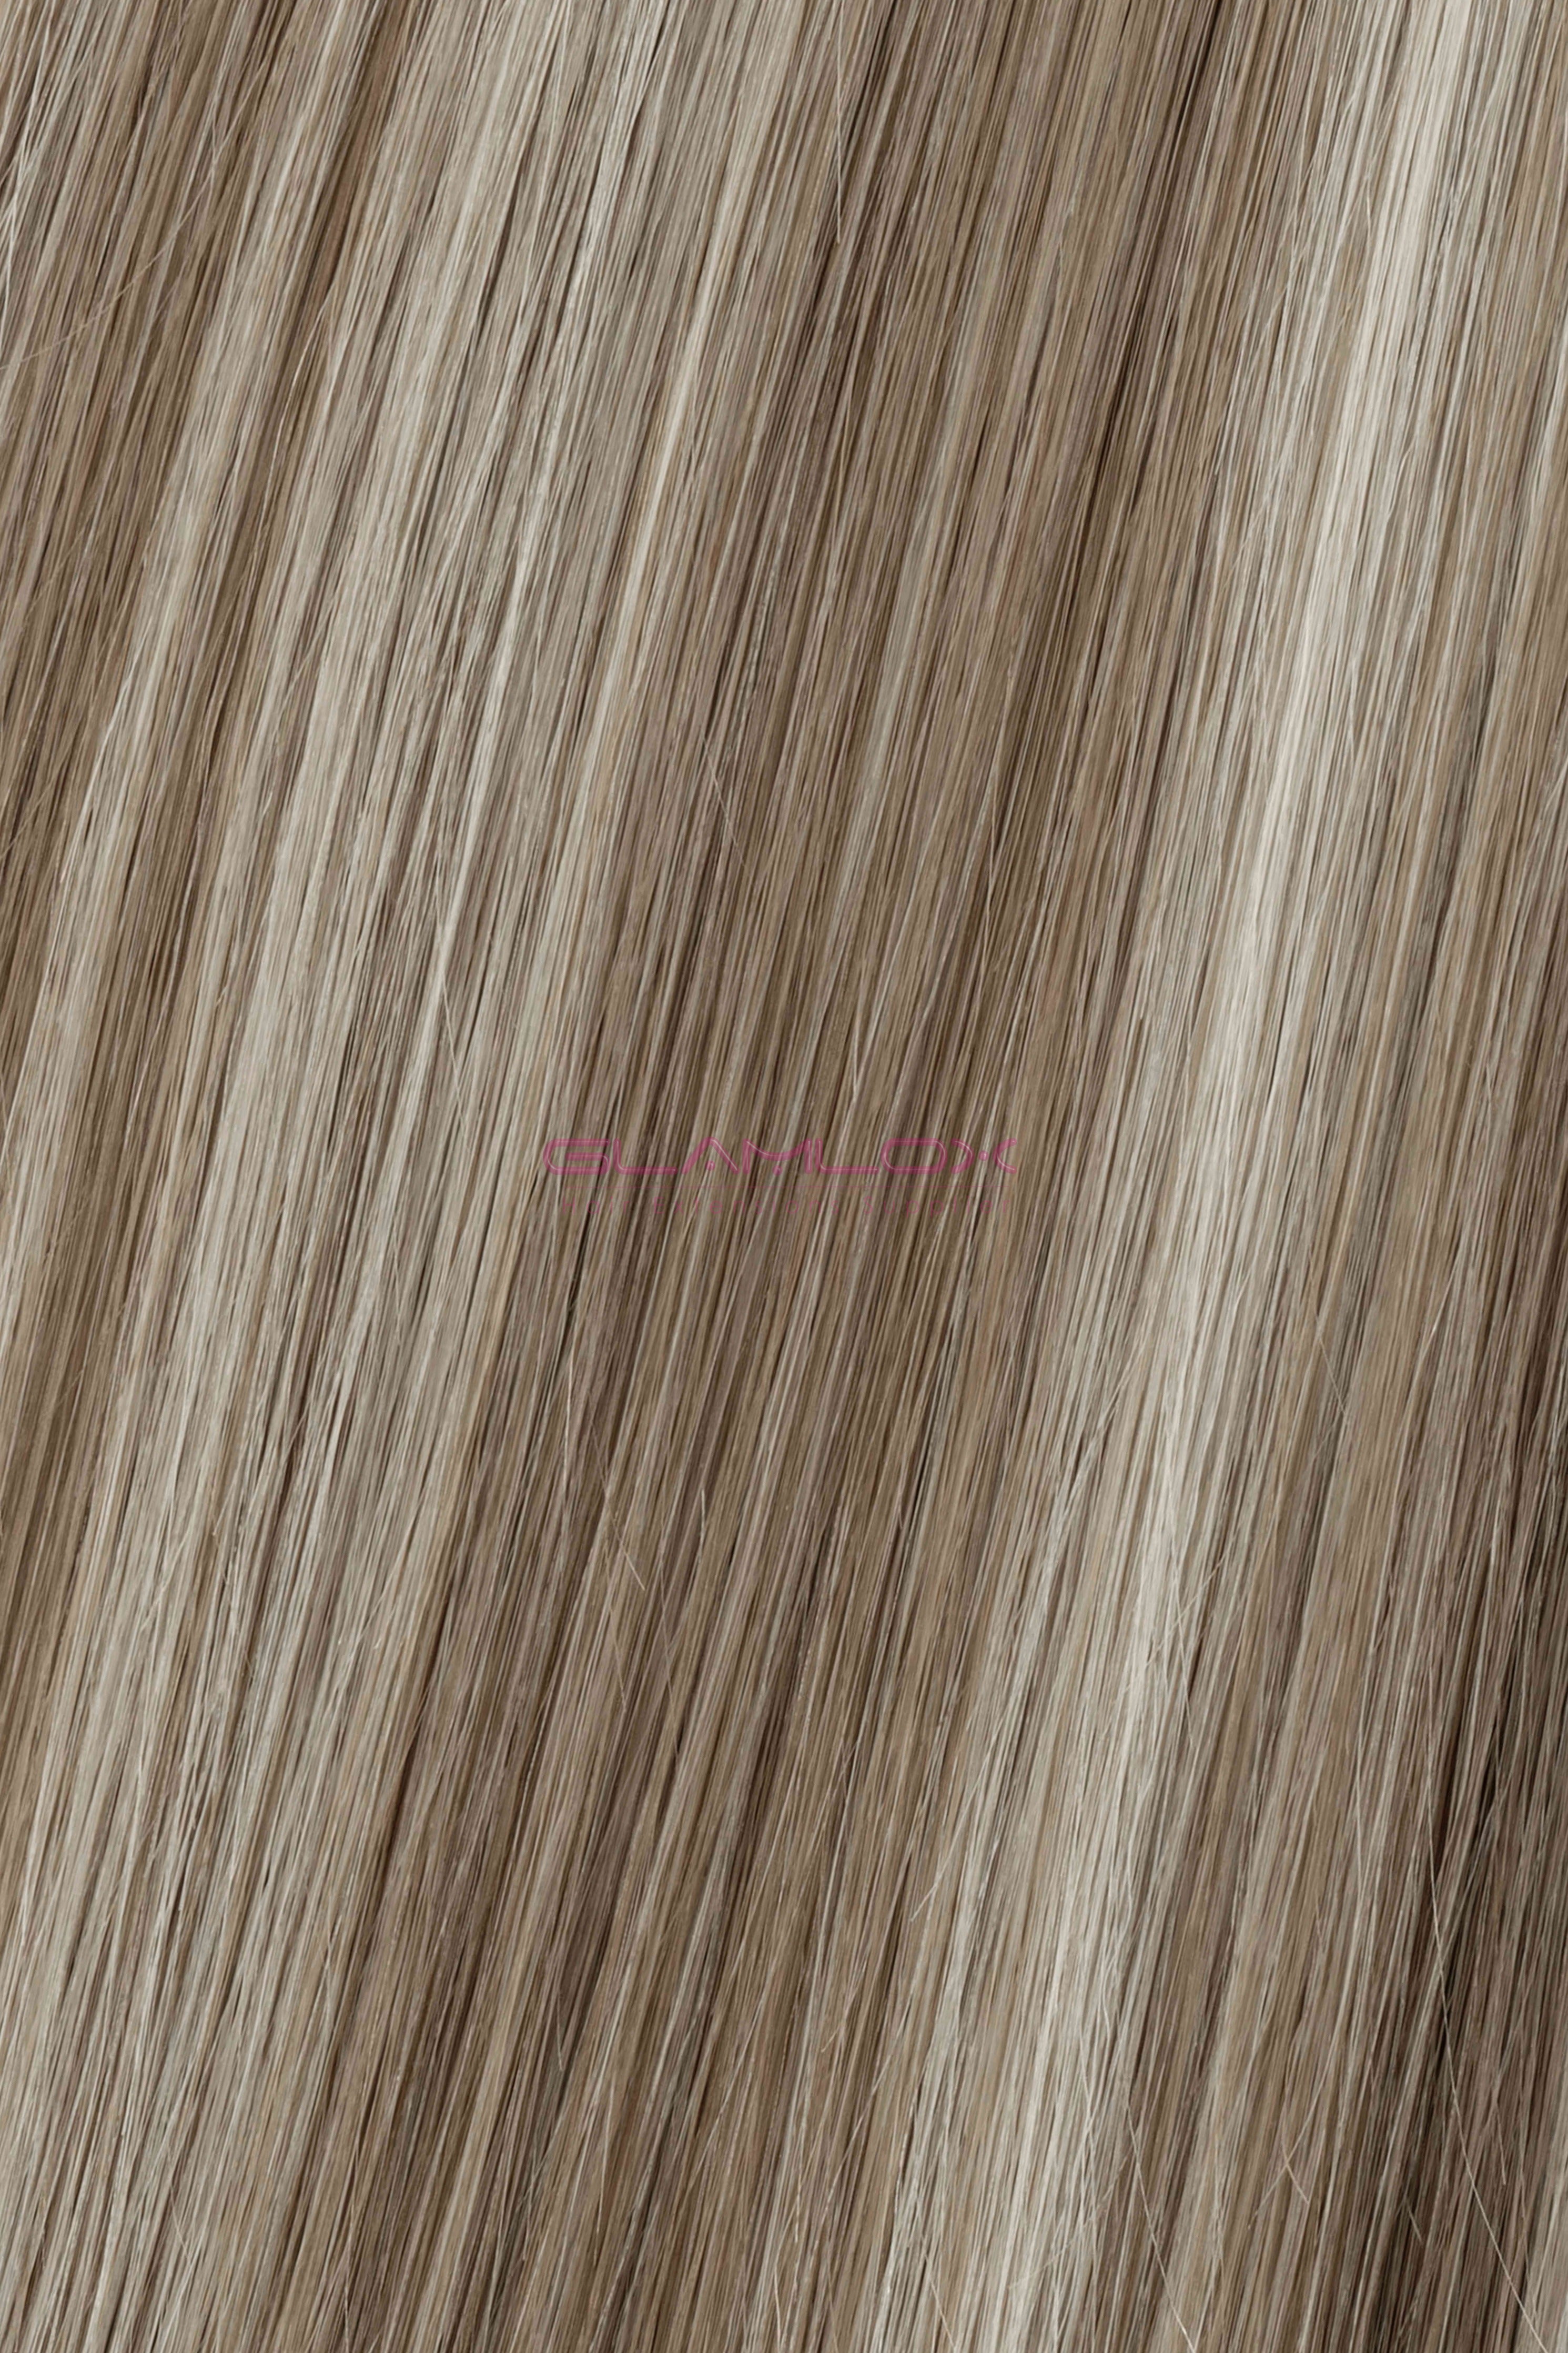 18" - 19" Nano Ring Hair Extensions - Russian Mongolian Double Drawn Remy Human Hair - 20 Strands